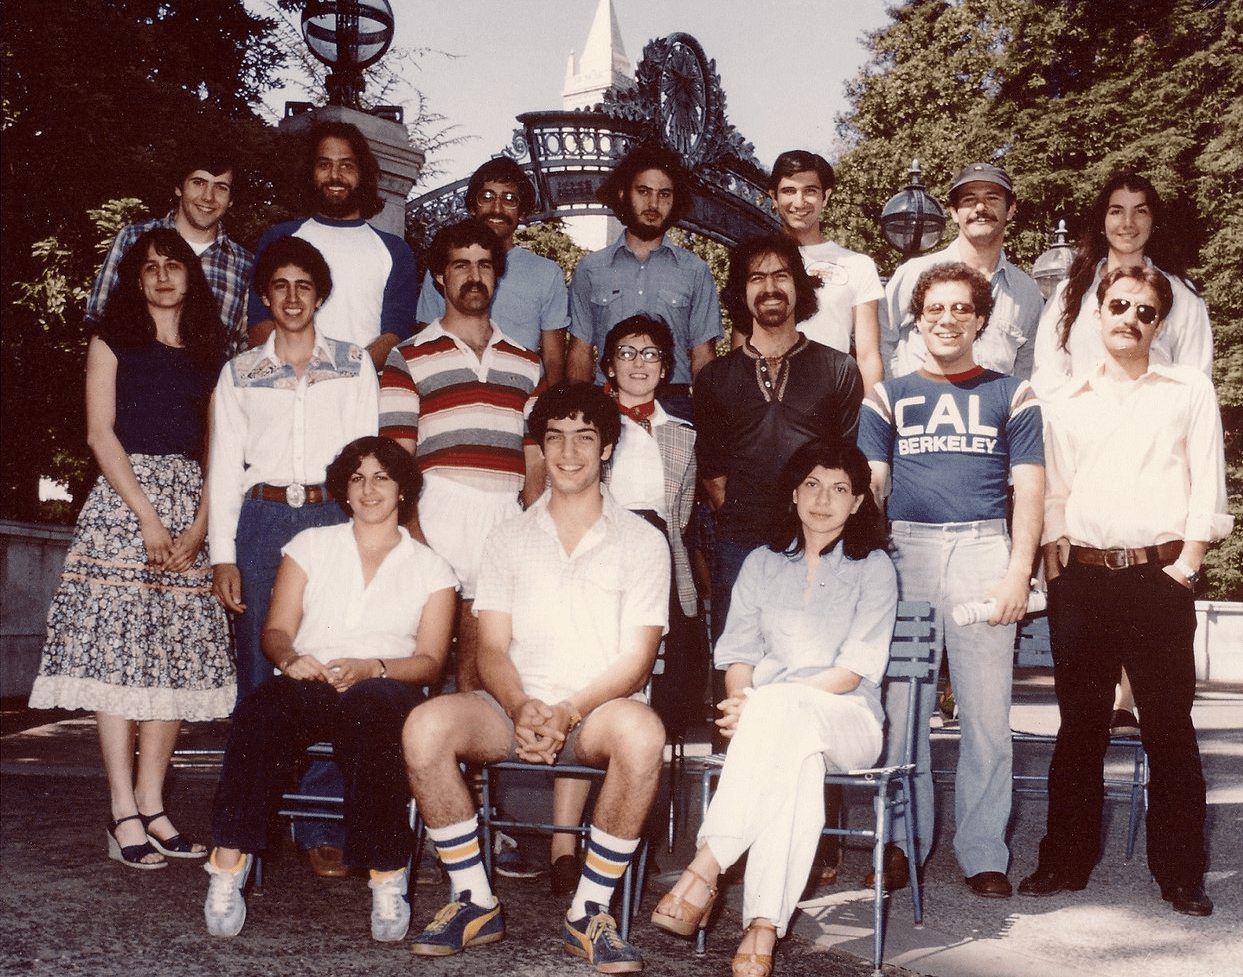 A historic photo of Armenian group of students in front of Sather Gate.